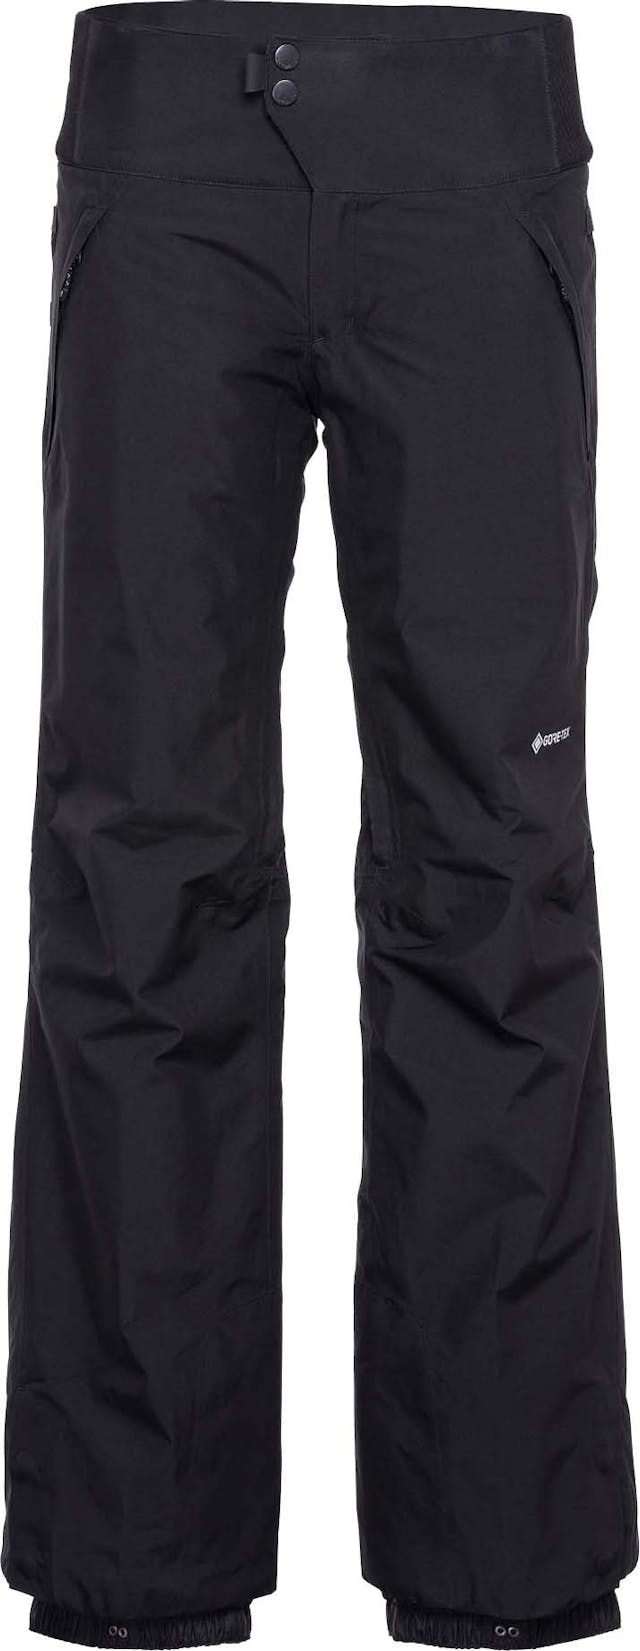 Product image for Gore-Tex Willow Insulated Pant - Women’s